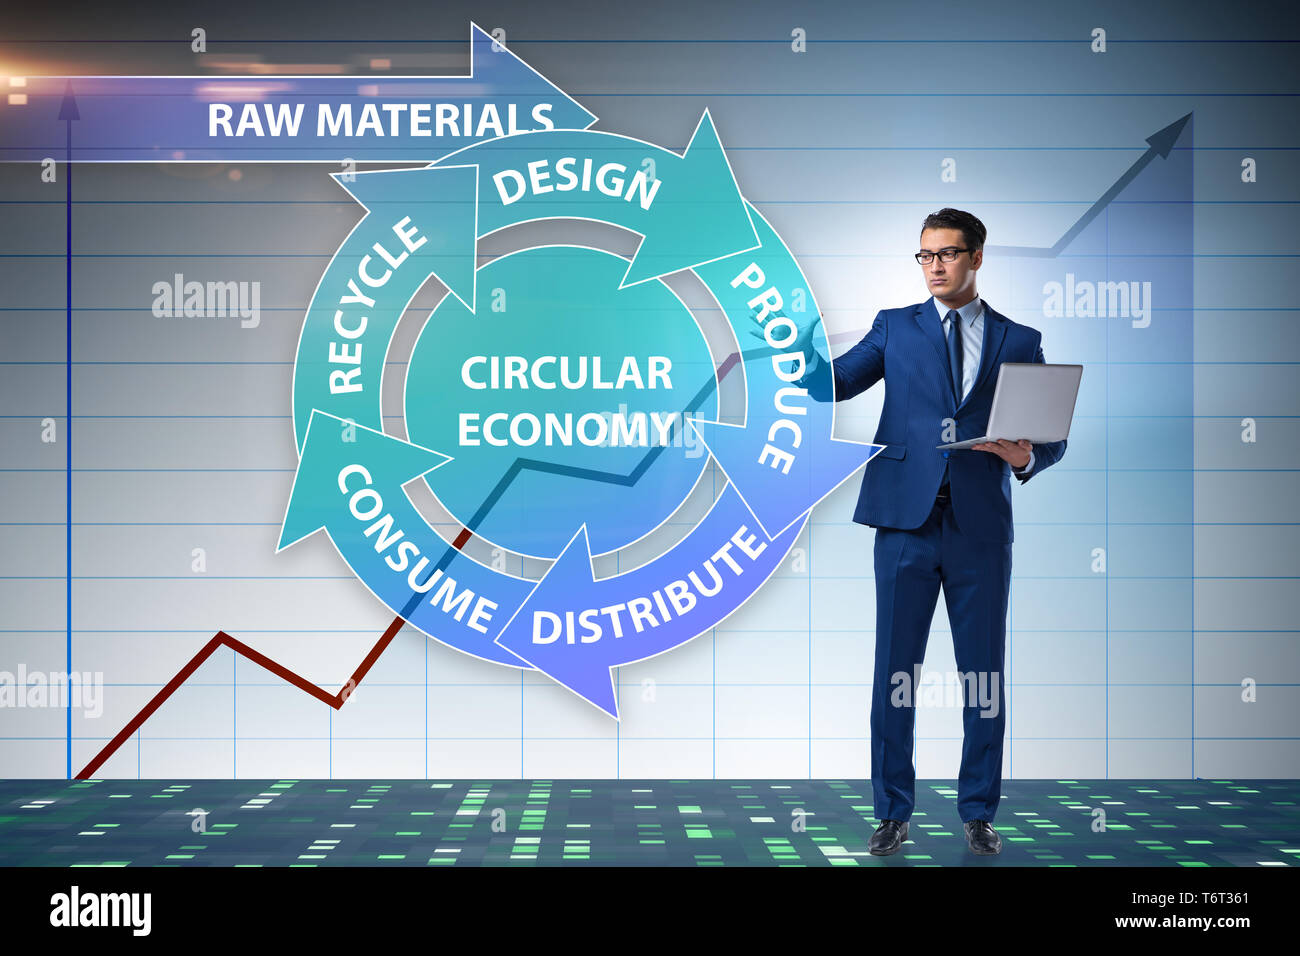 Concept of circular economy with businessman Stock Photo